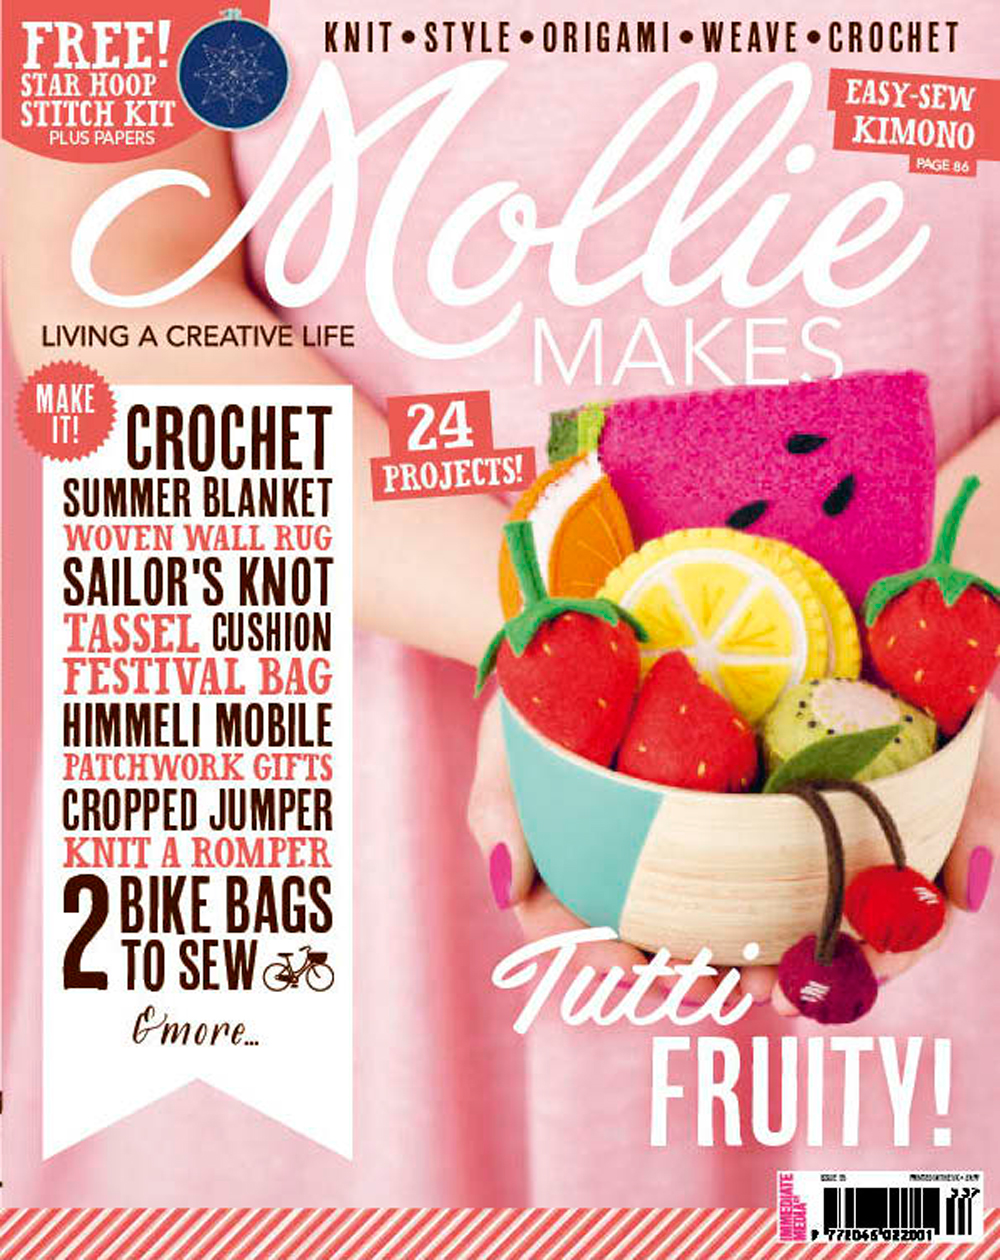 FEATURE-_-Mollie-Makes-Issue-53-2